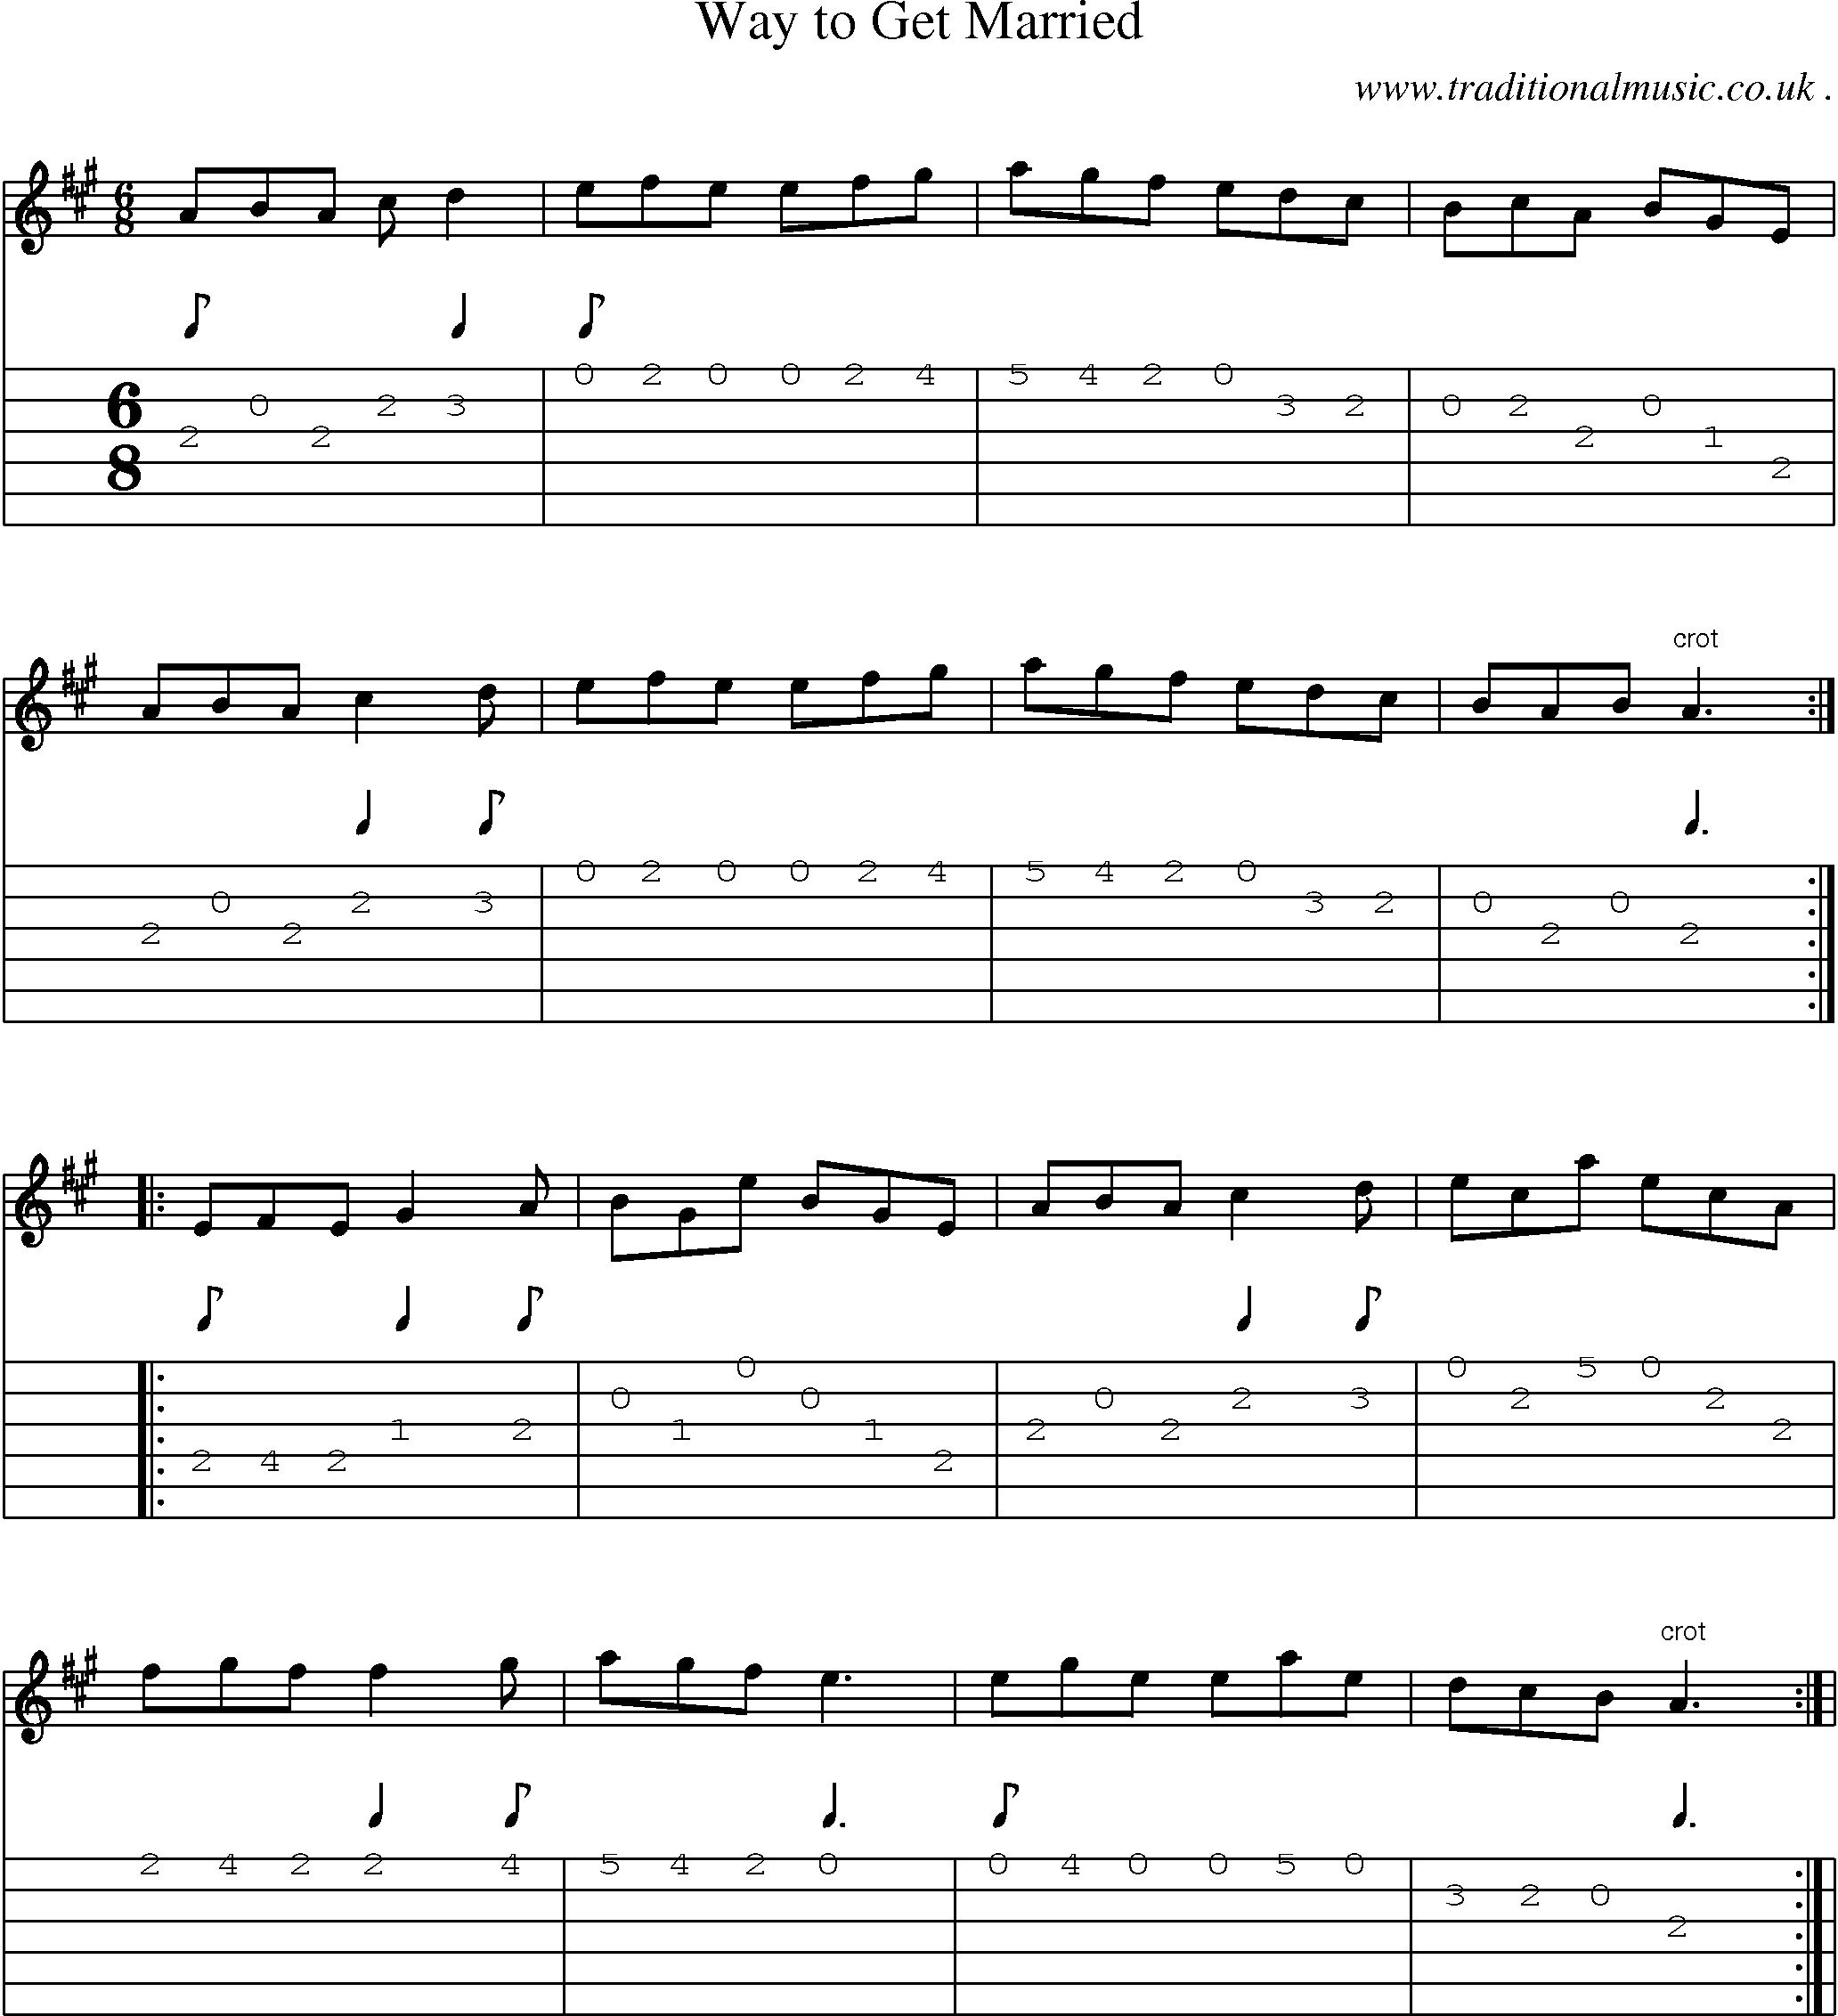 Sheet-Music and Guitar Tabs for Way To Get Married